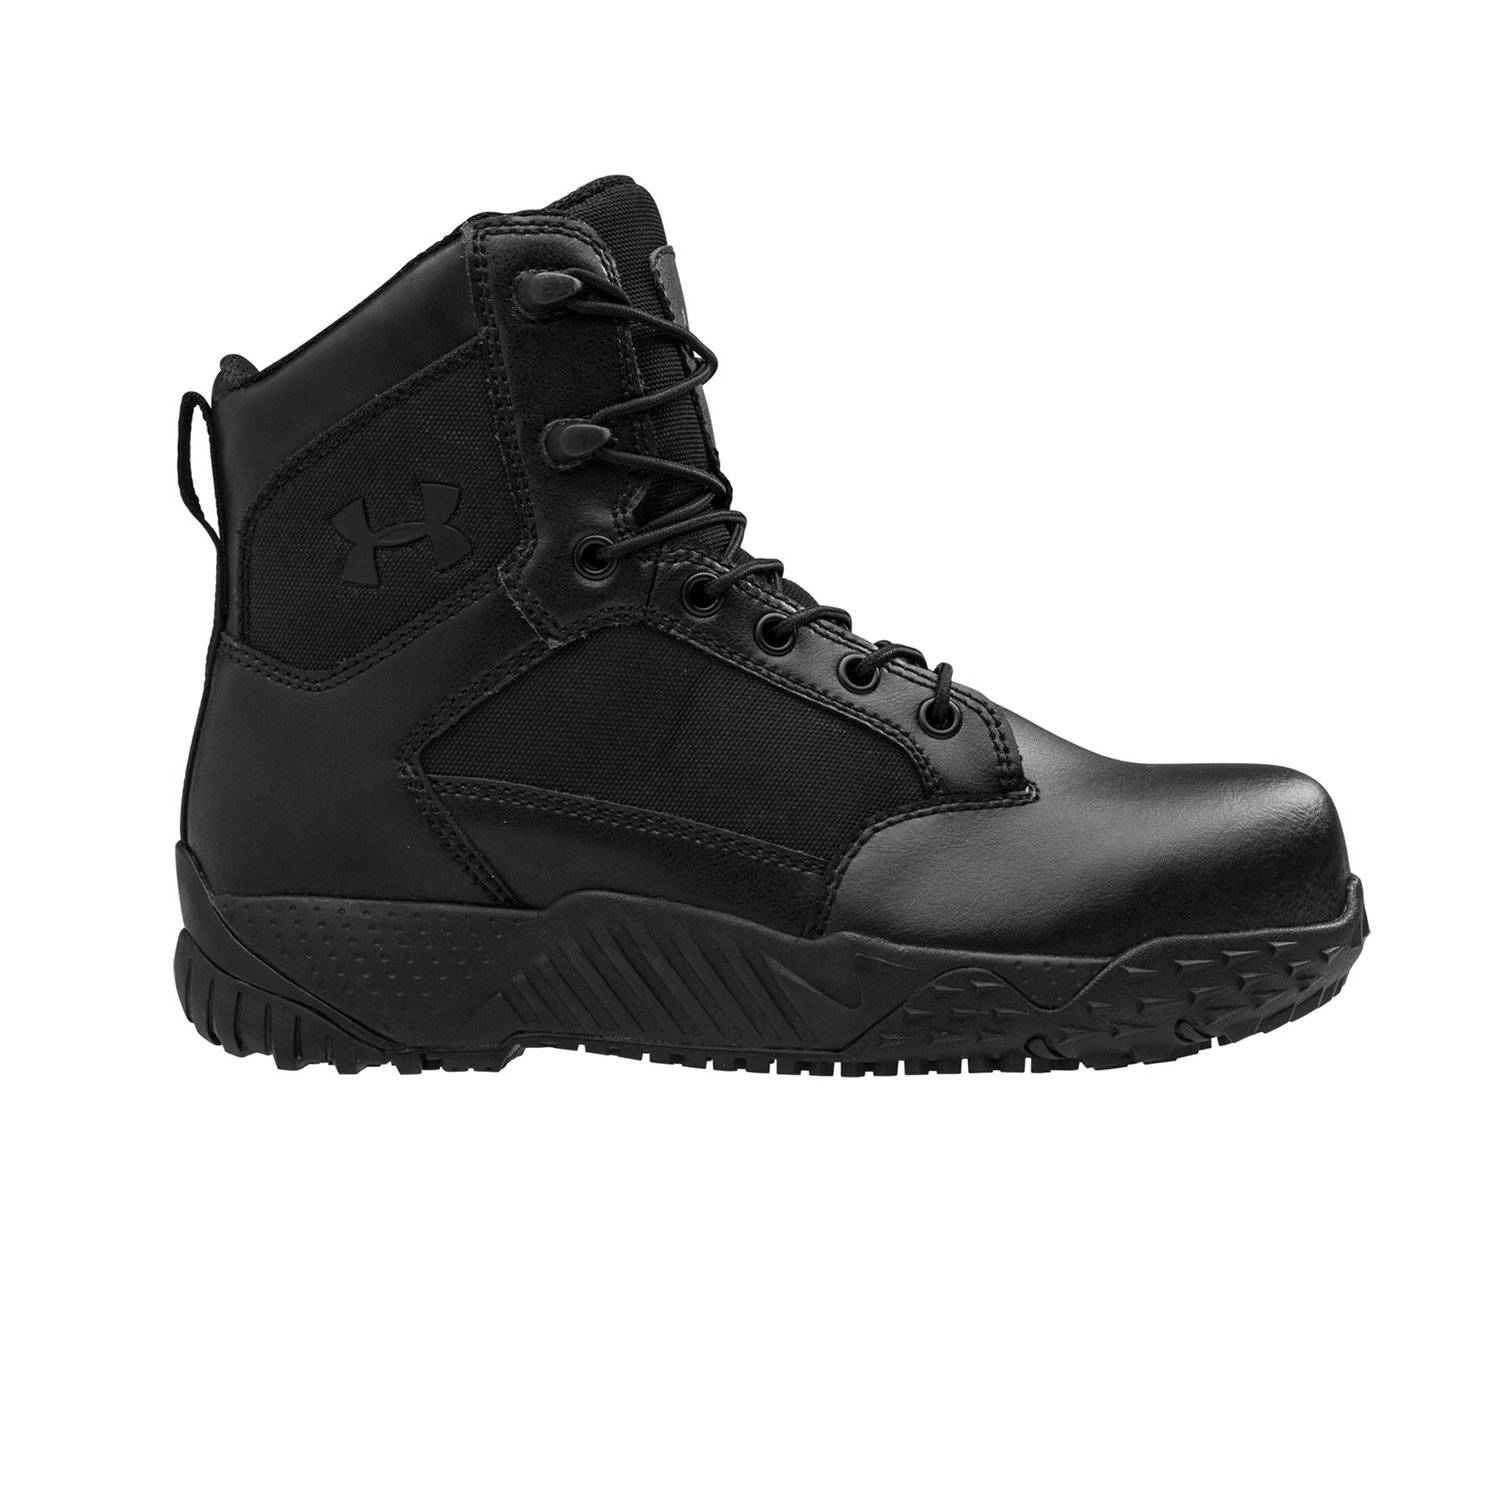 Under Armour Women's Stellar Tac Protect Composite Toe Boot